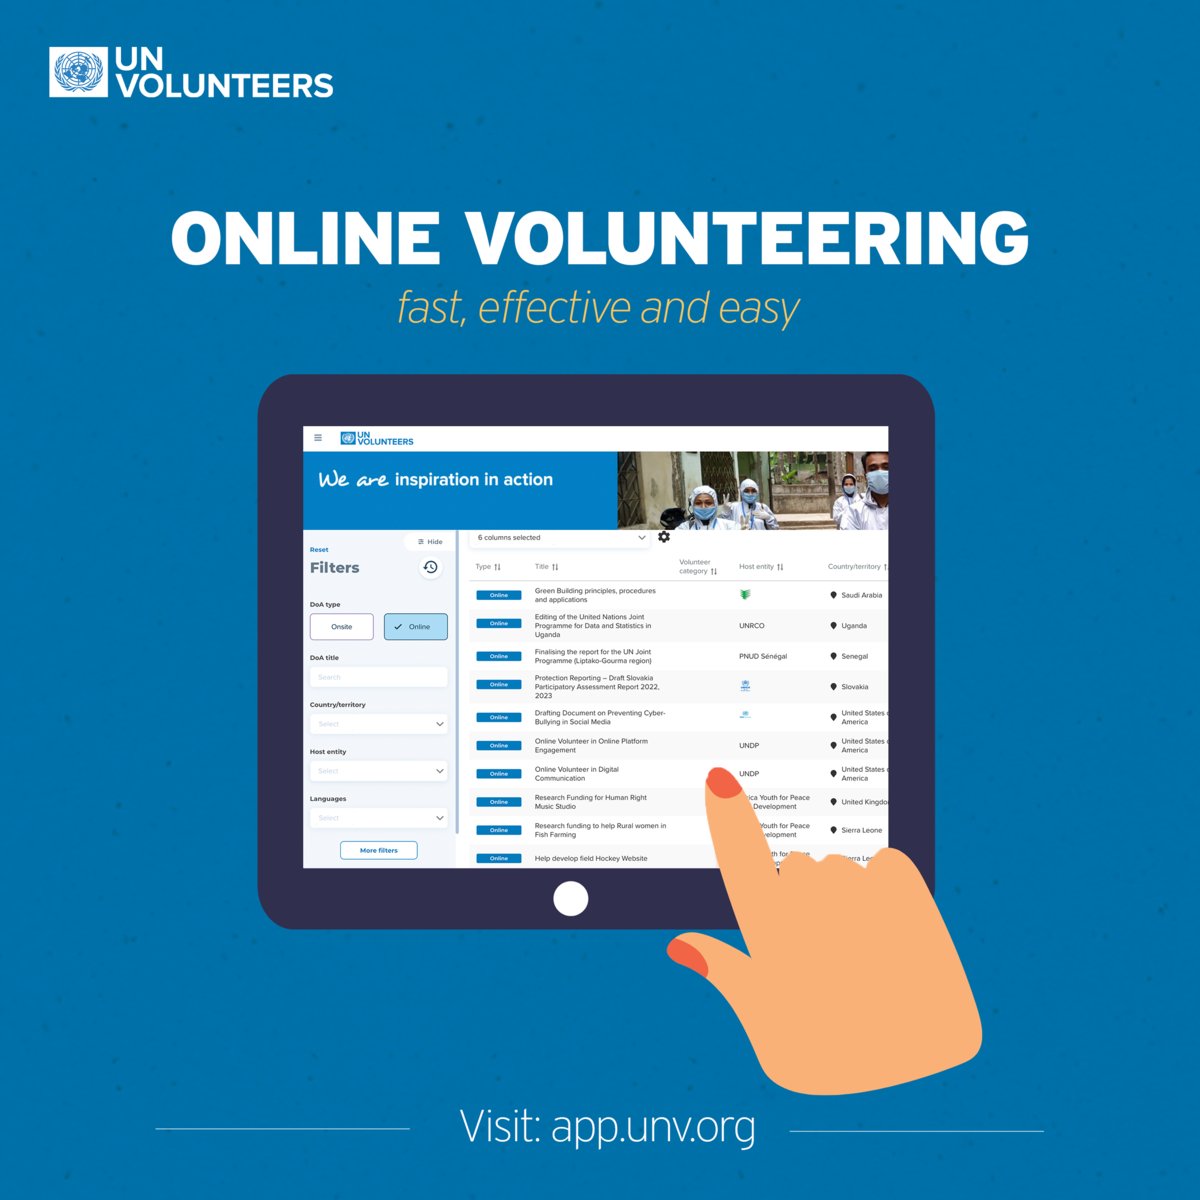 Did you know through online volunteering you contribute your skills & expertise towards achieving sustainable human development. You get first-hand practical experience with UN organizations. Make an impact and visit 💻app.unv.org